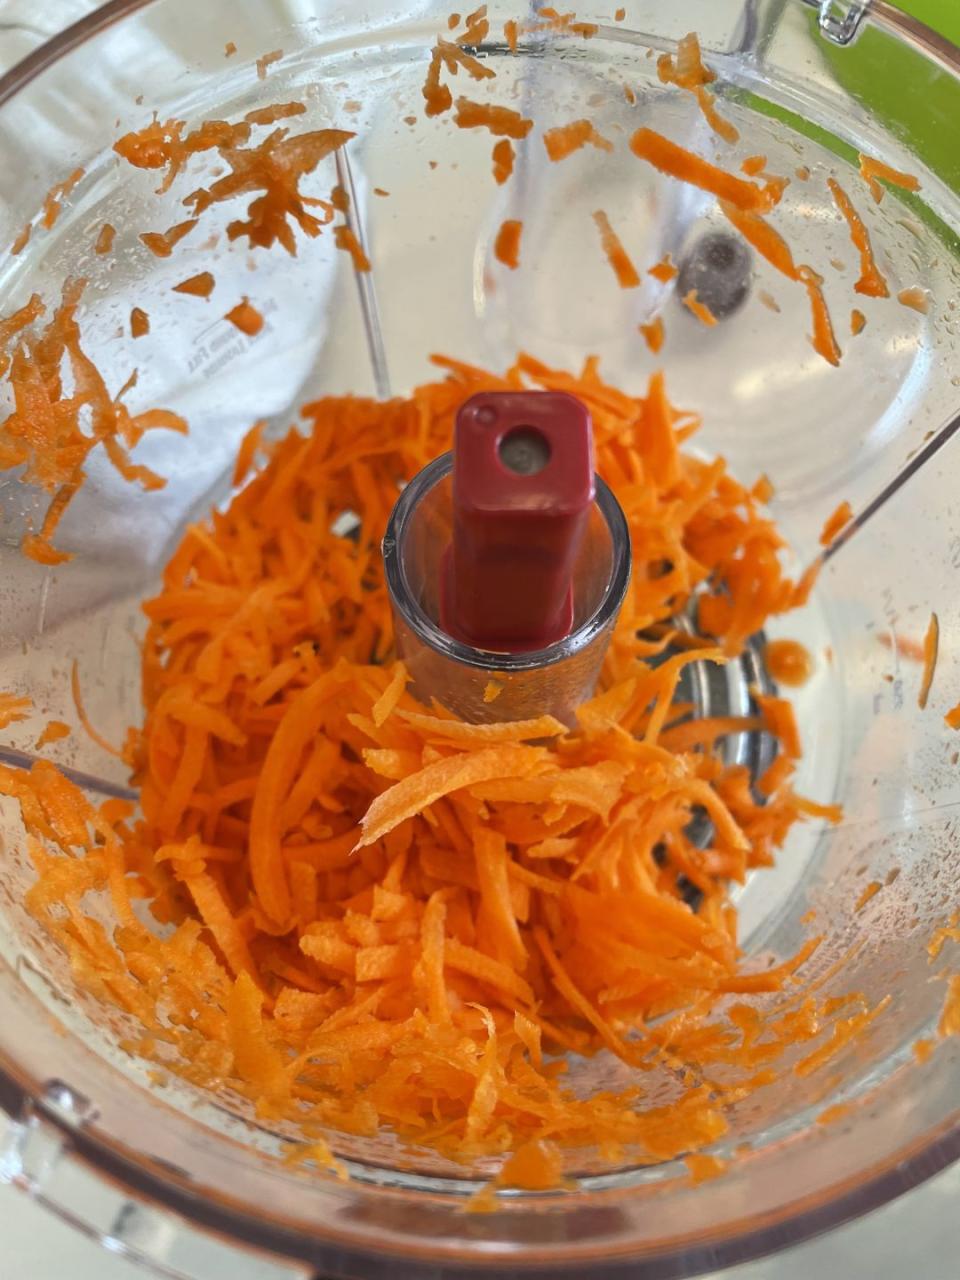 <p>If a blender comes with a food processor attachment, we also test that attachment to see how well it performs. We shred carrots and mozzarella, mince parsley, grind parmesan and slice pepperoni and tomatoes. </p><p>When testing, we rate the helpfulness of the owner’s manual and evaluate how easy each model is to assemble, use and clean. We also consider how noisy each blender is while operating. Finally, we check how well the blender cups resist staining from tomato sauce that is left overnight. We measure the wear after 14 cycles in the dishwasher.</p>